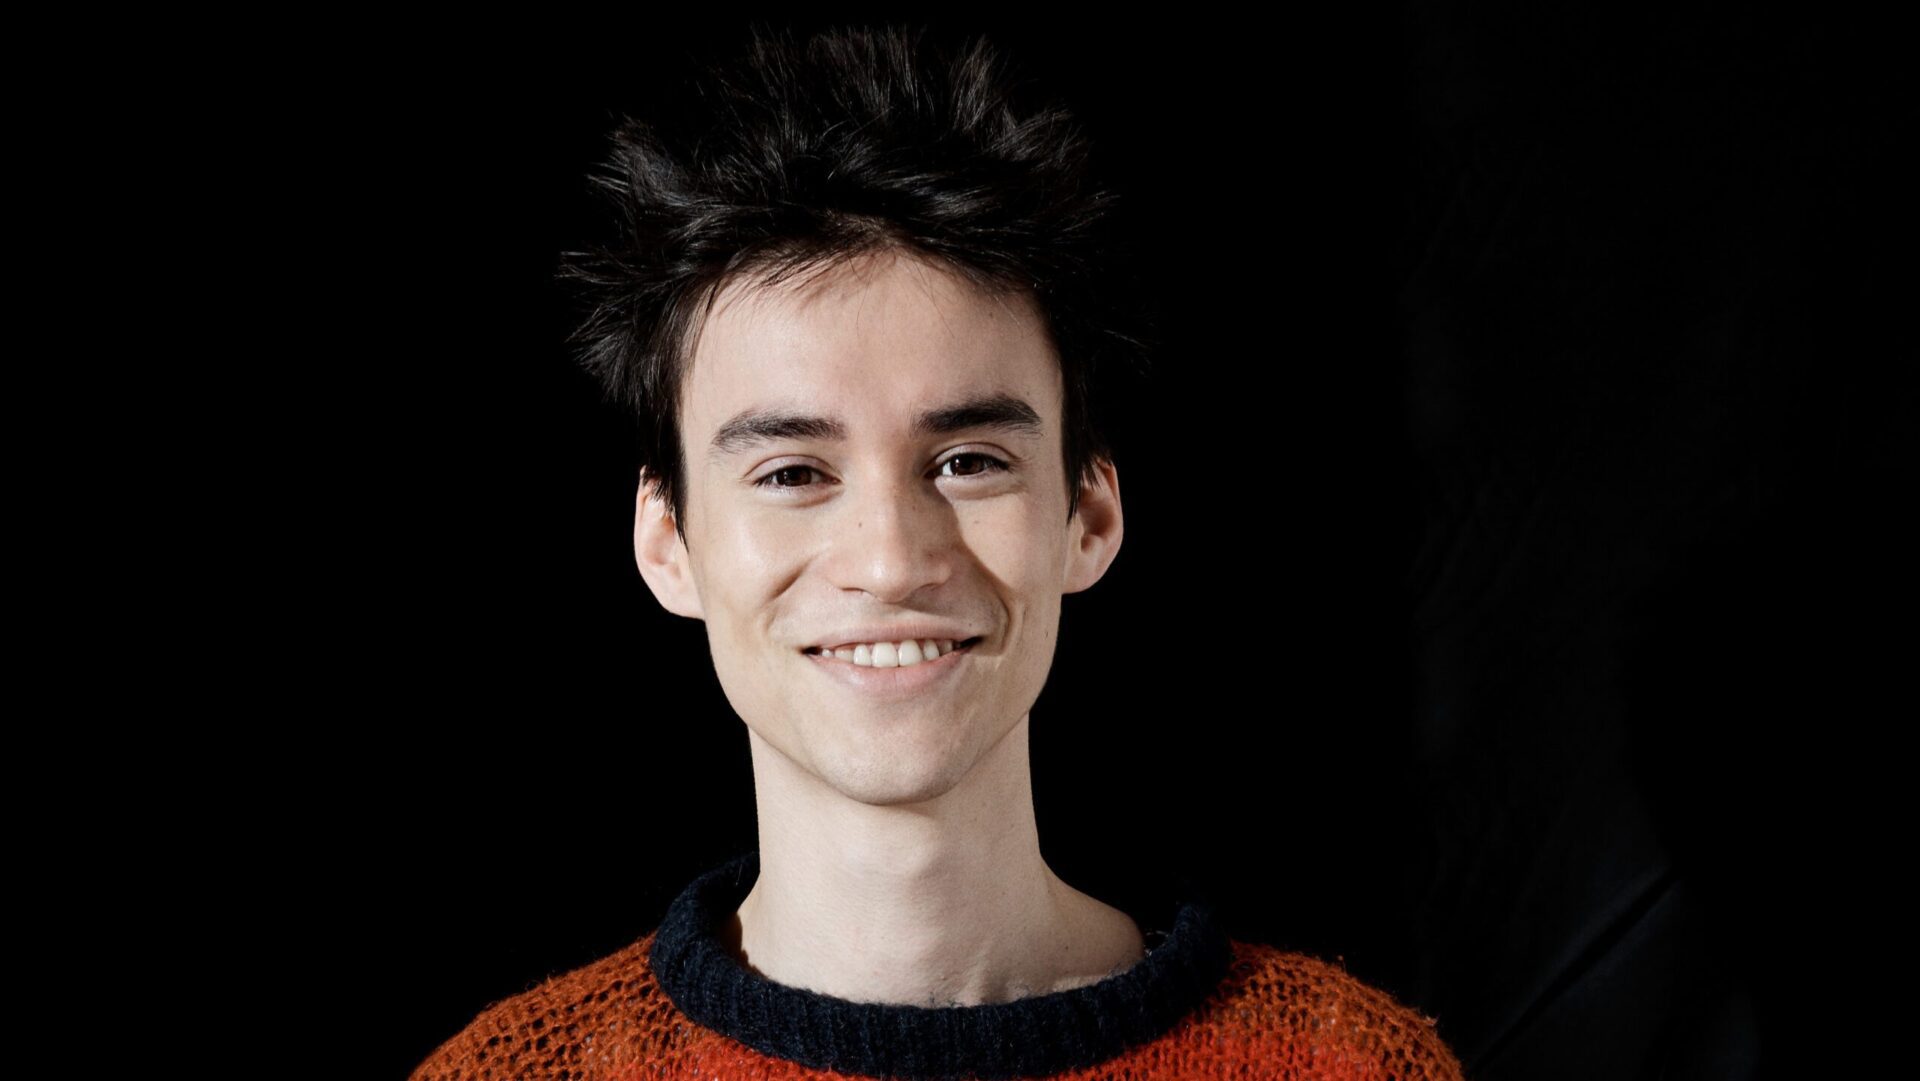 Image of jacob collier singer of Wellll